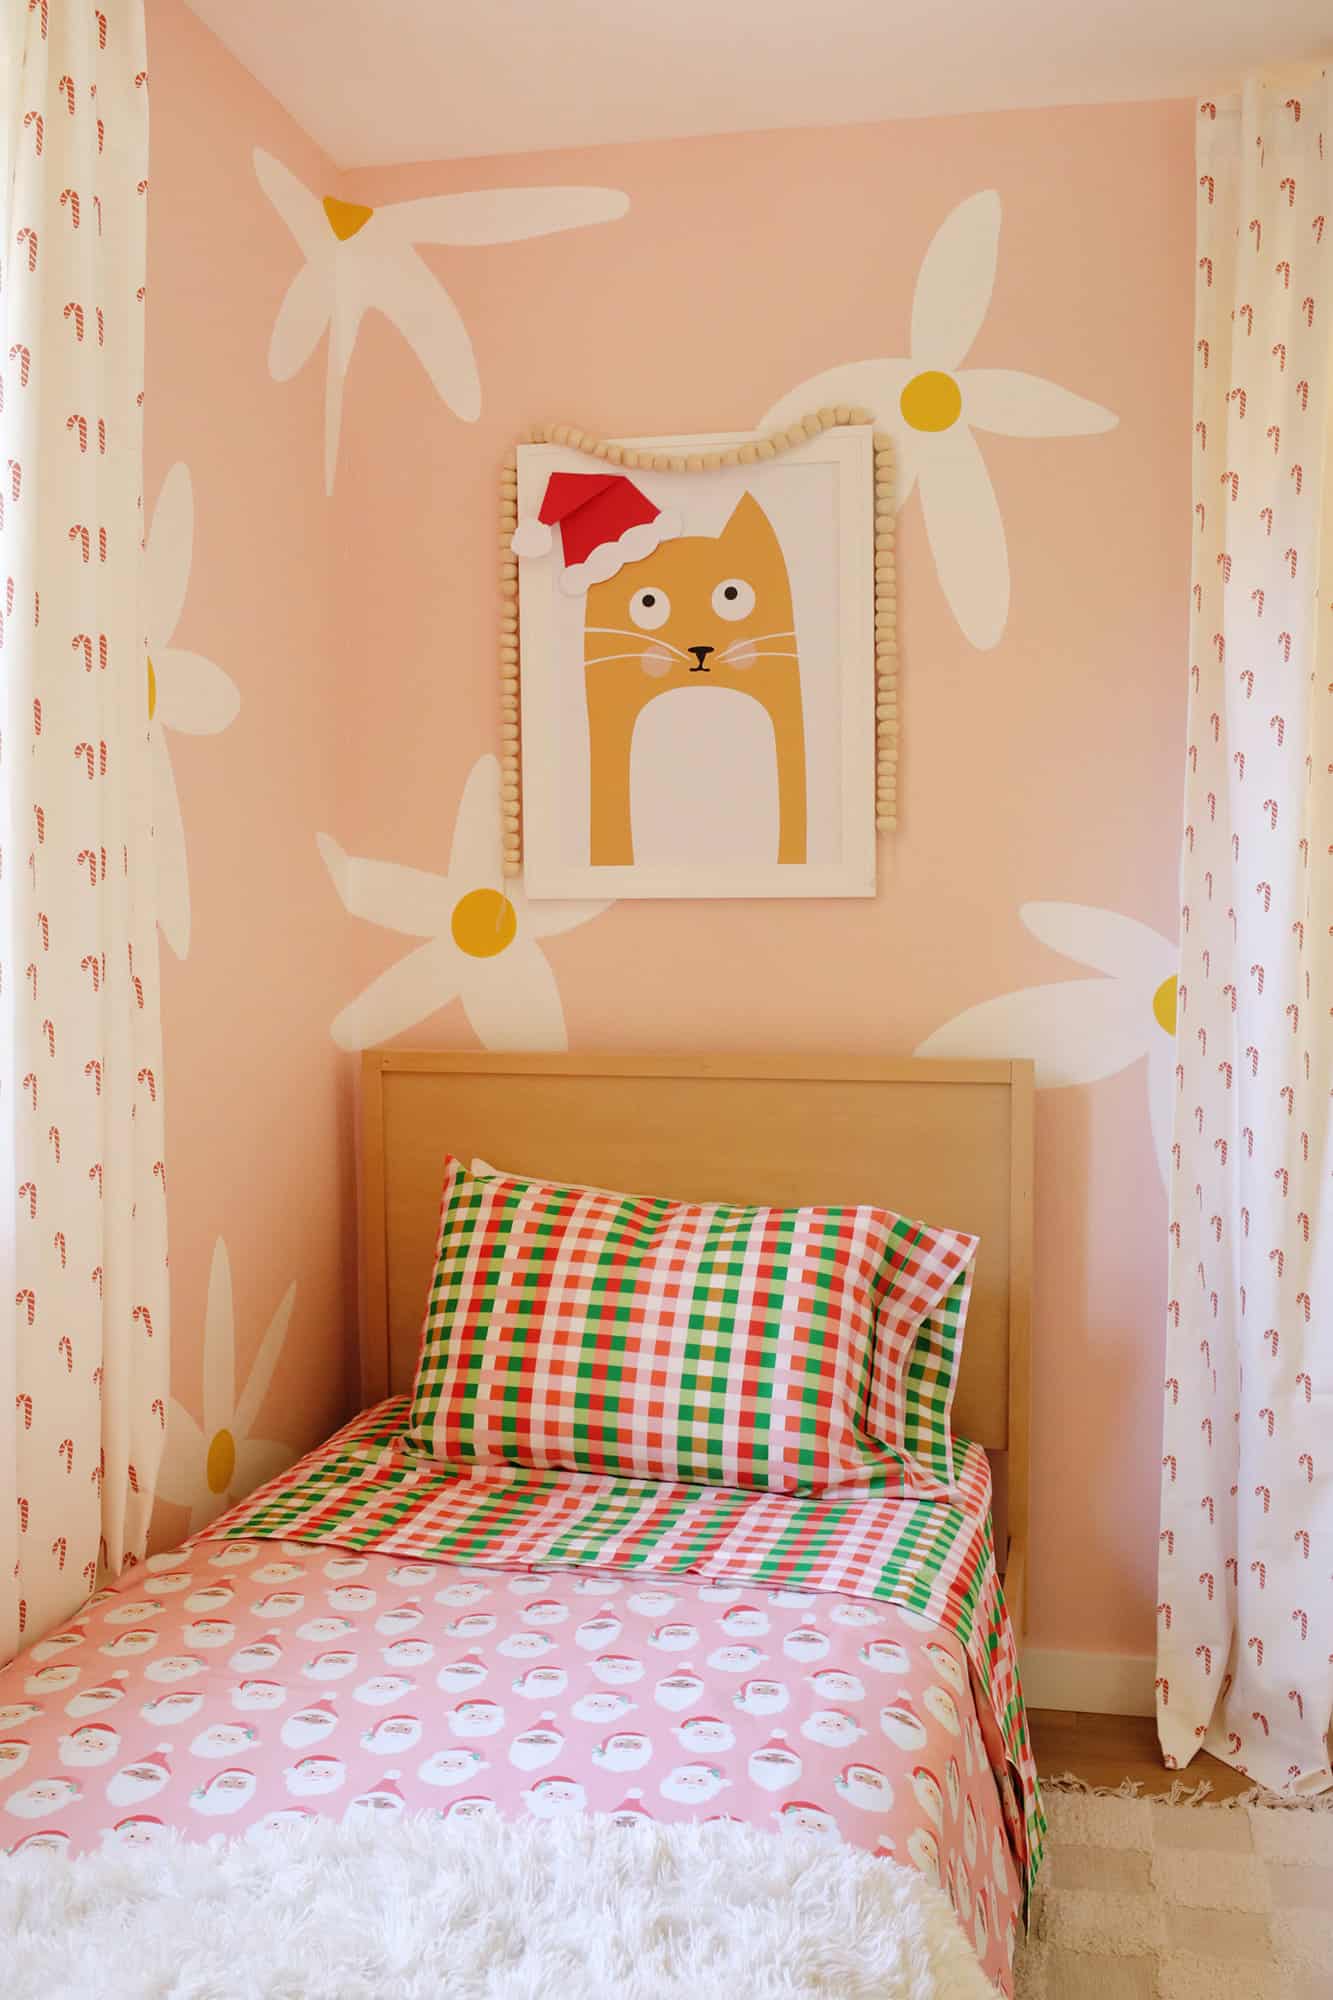 Santa sheets on children's bed for the holidays